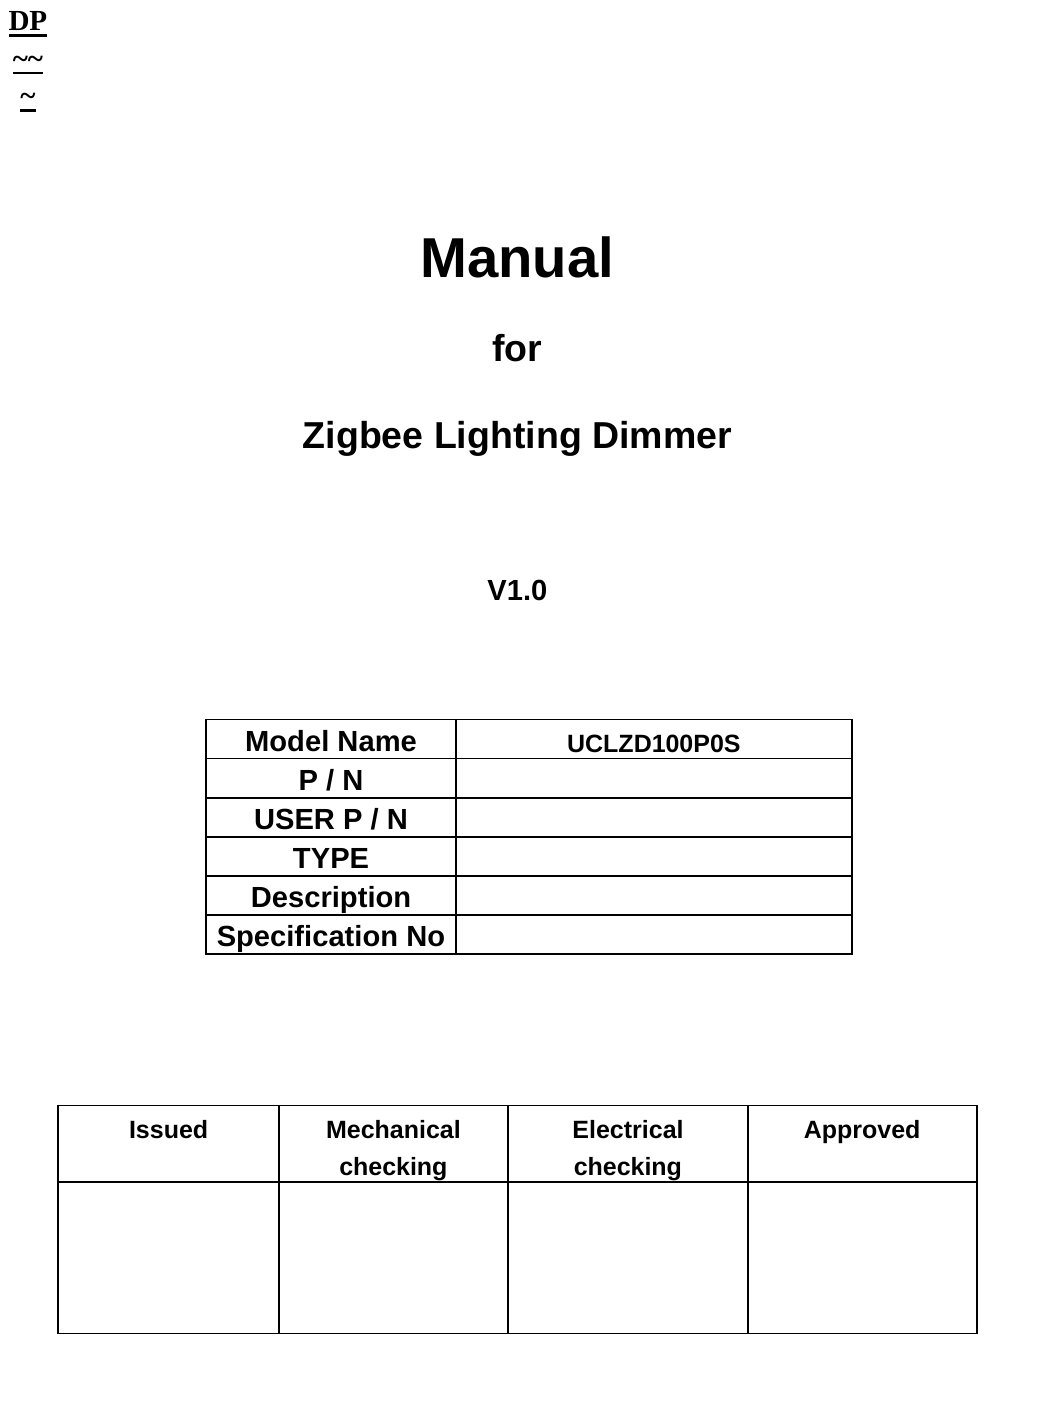 DP~~~         Manual  for  Zigbee Lighting Dimmer          V1.0               Model Name  UCLZD100P0S      P / N        USER P / N        TYPE        Description       Specification No               Issued Mechanical checking Electrical checking Approved                                       